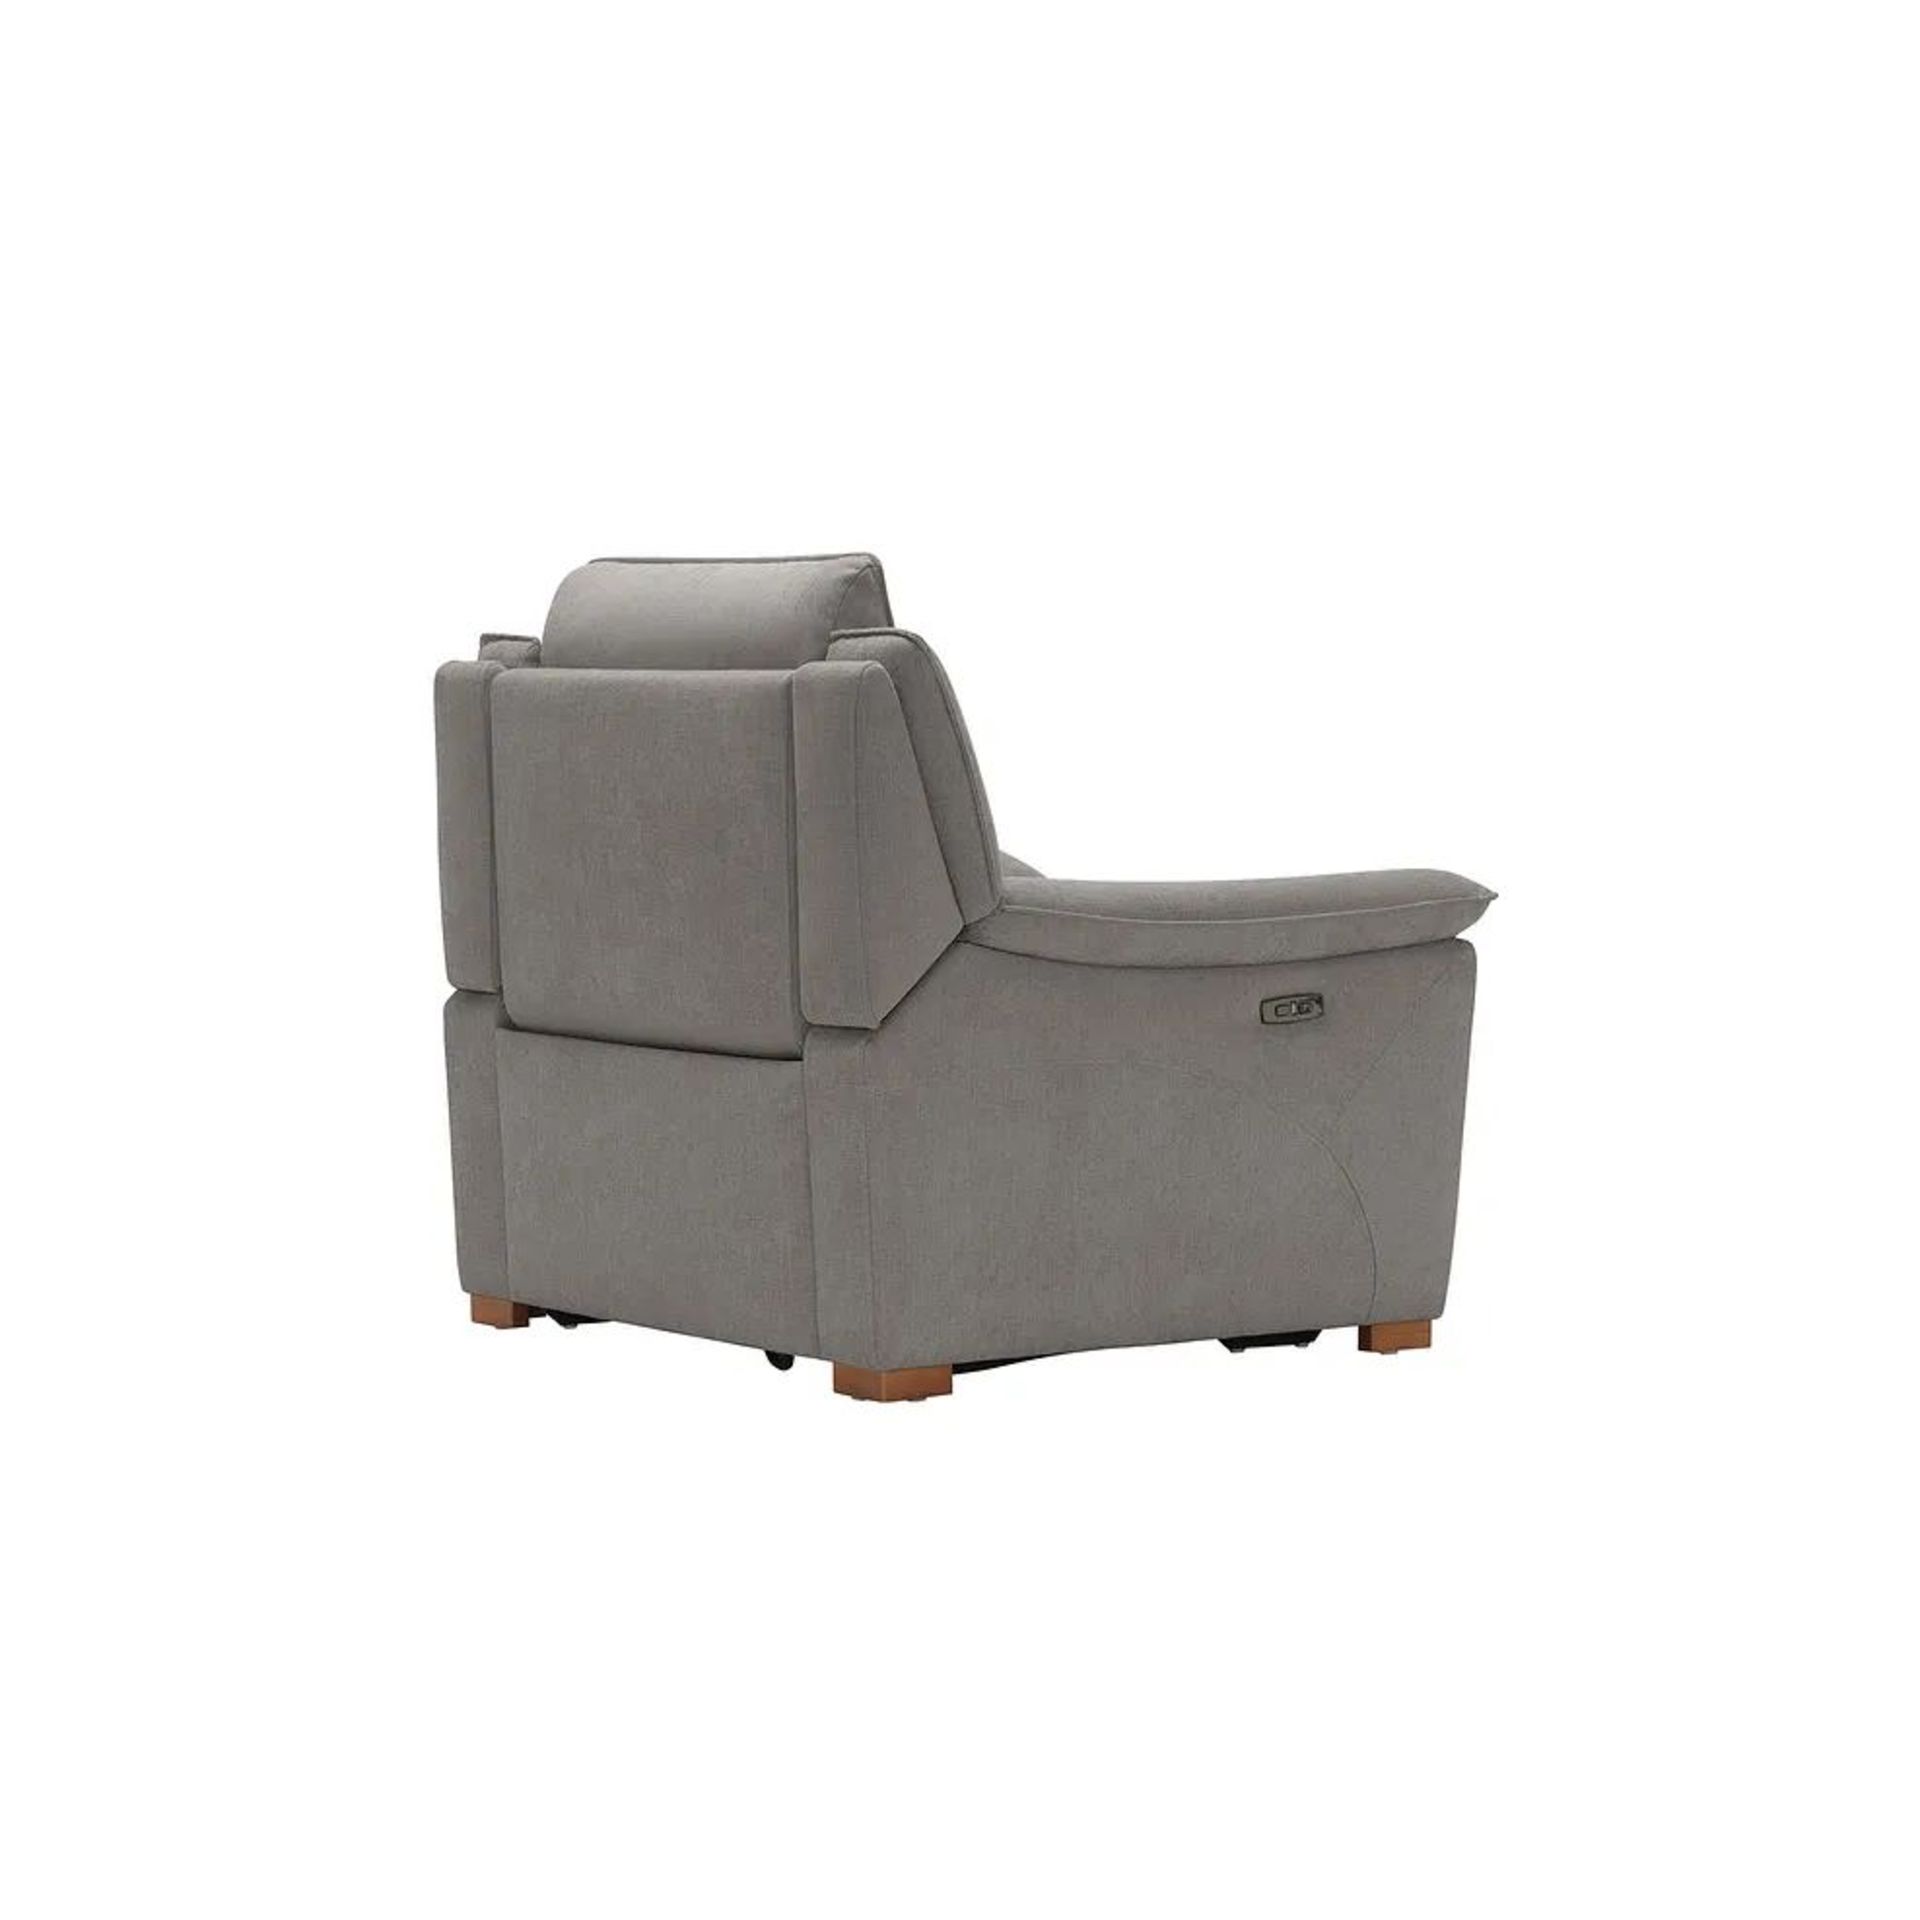 BRAND NEW DUNE Electric Recliner Armchair with Power Headrest - AMIGO GRANITE FABRIC. RRP £1099. - Image 7 of 12